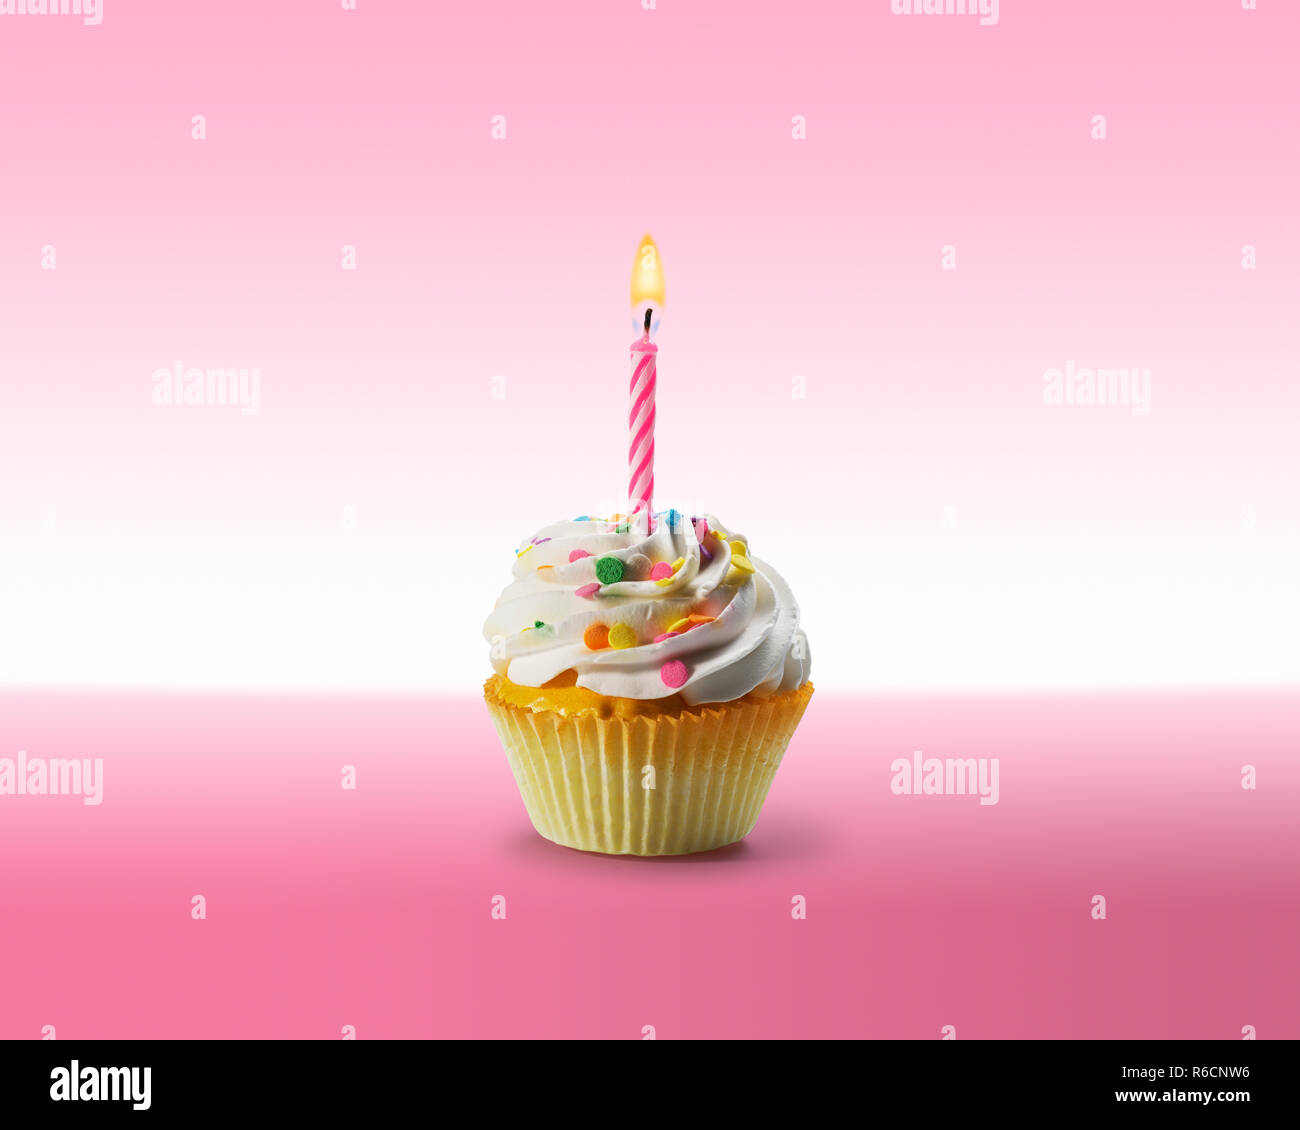 Birthday cupcake with frosting and a lit candle on a pink surface Stock Photo